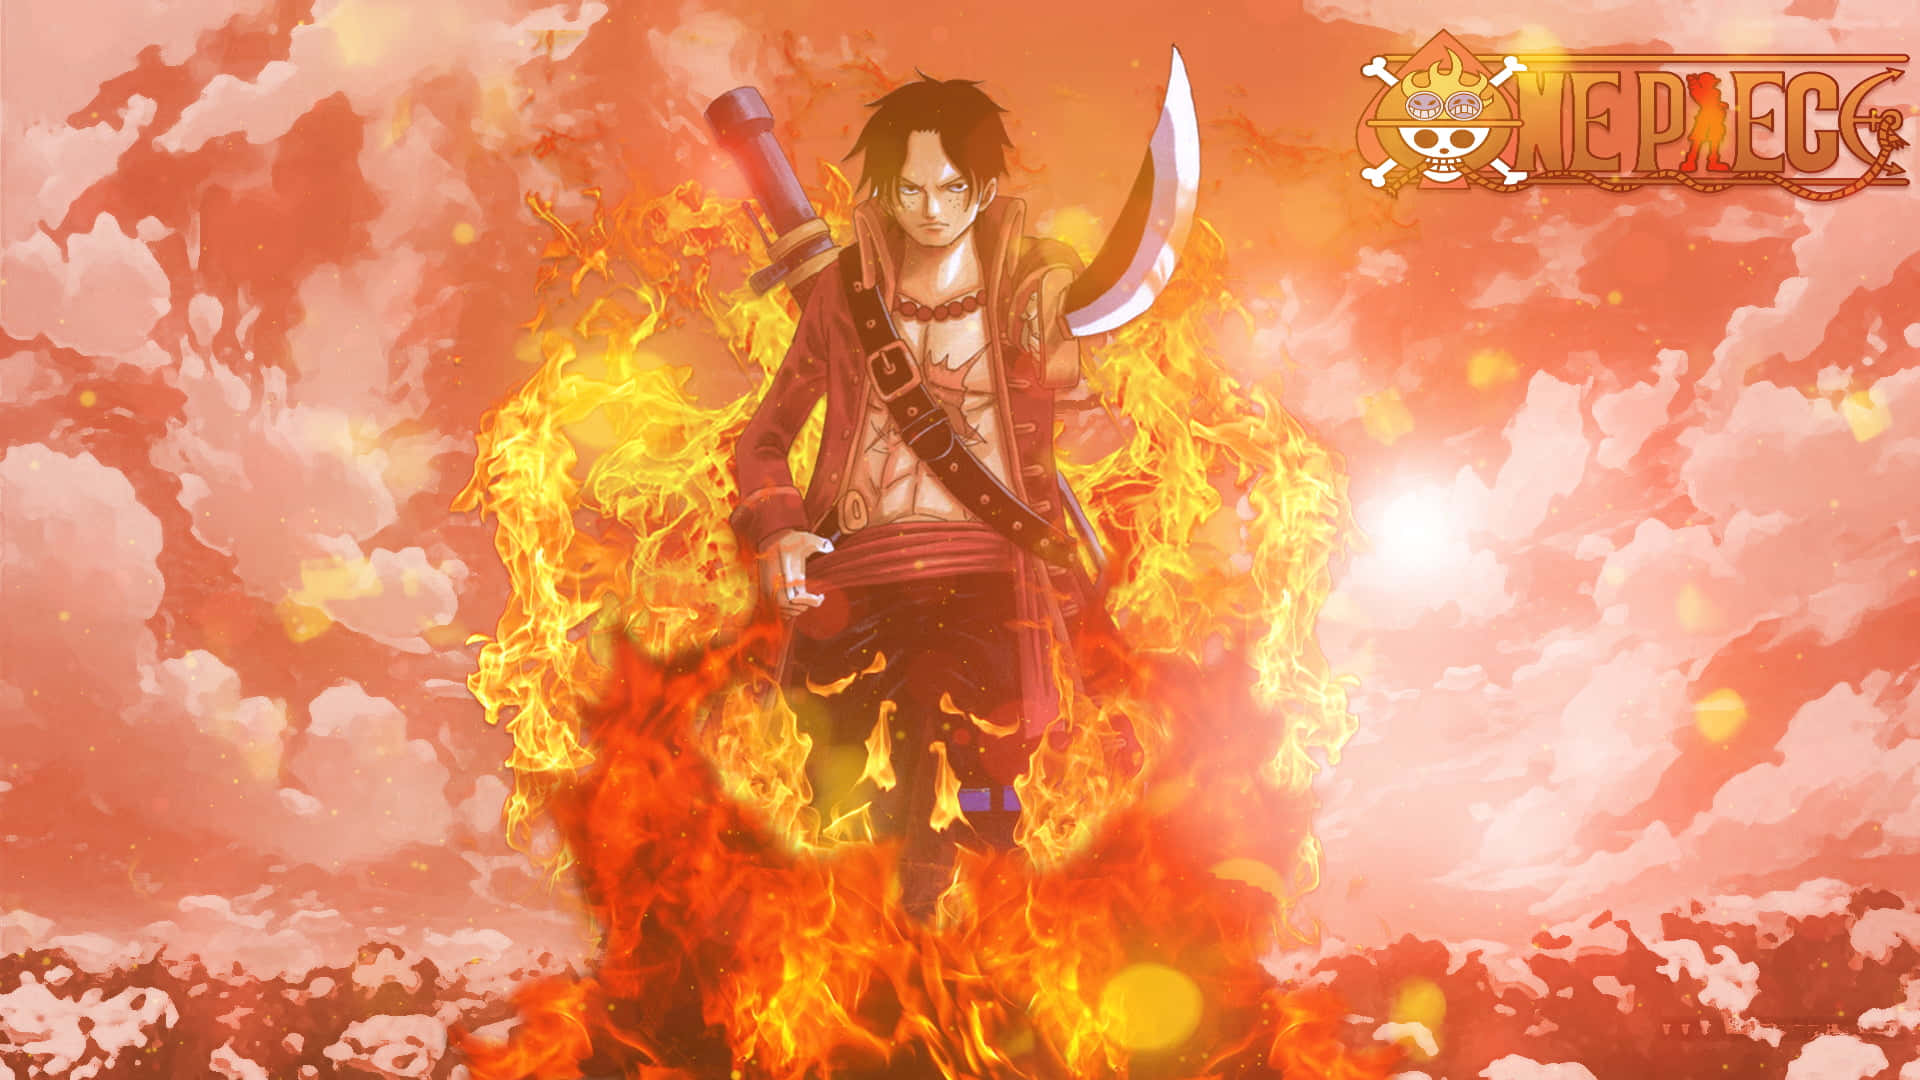 Portgas D Ace, the fiery pirate from One Piece. Wallpaper